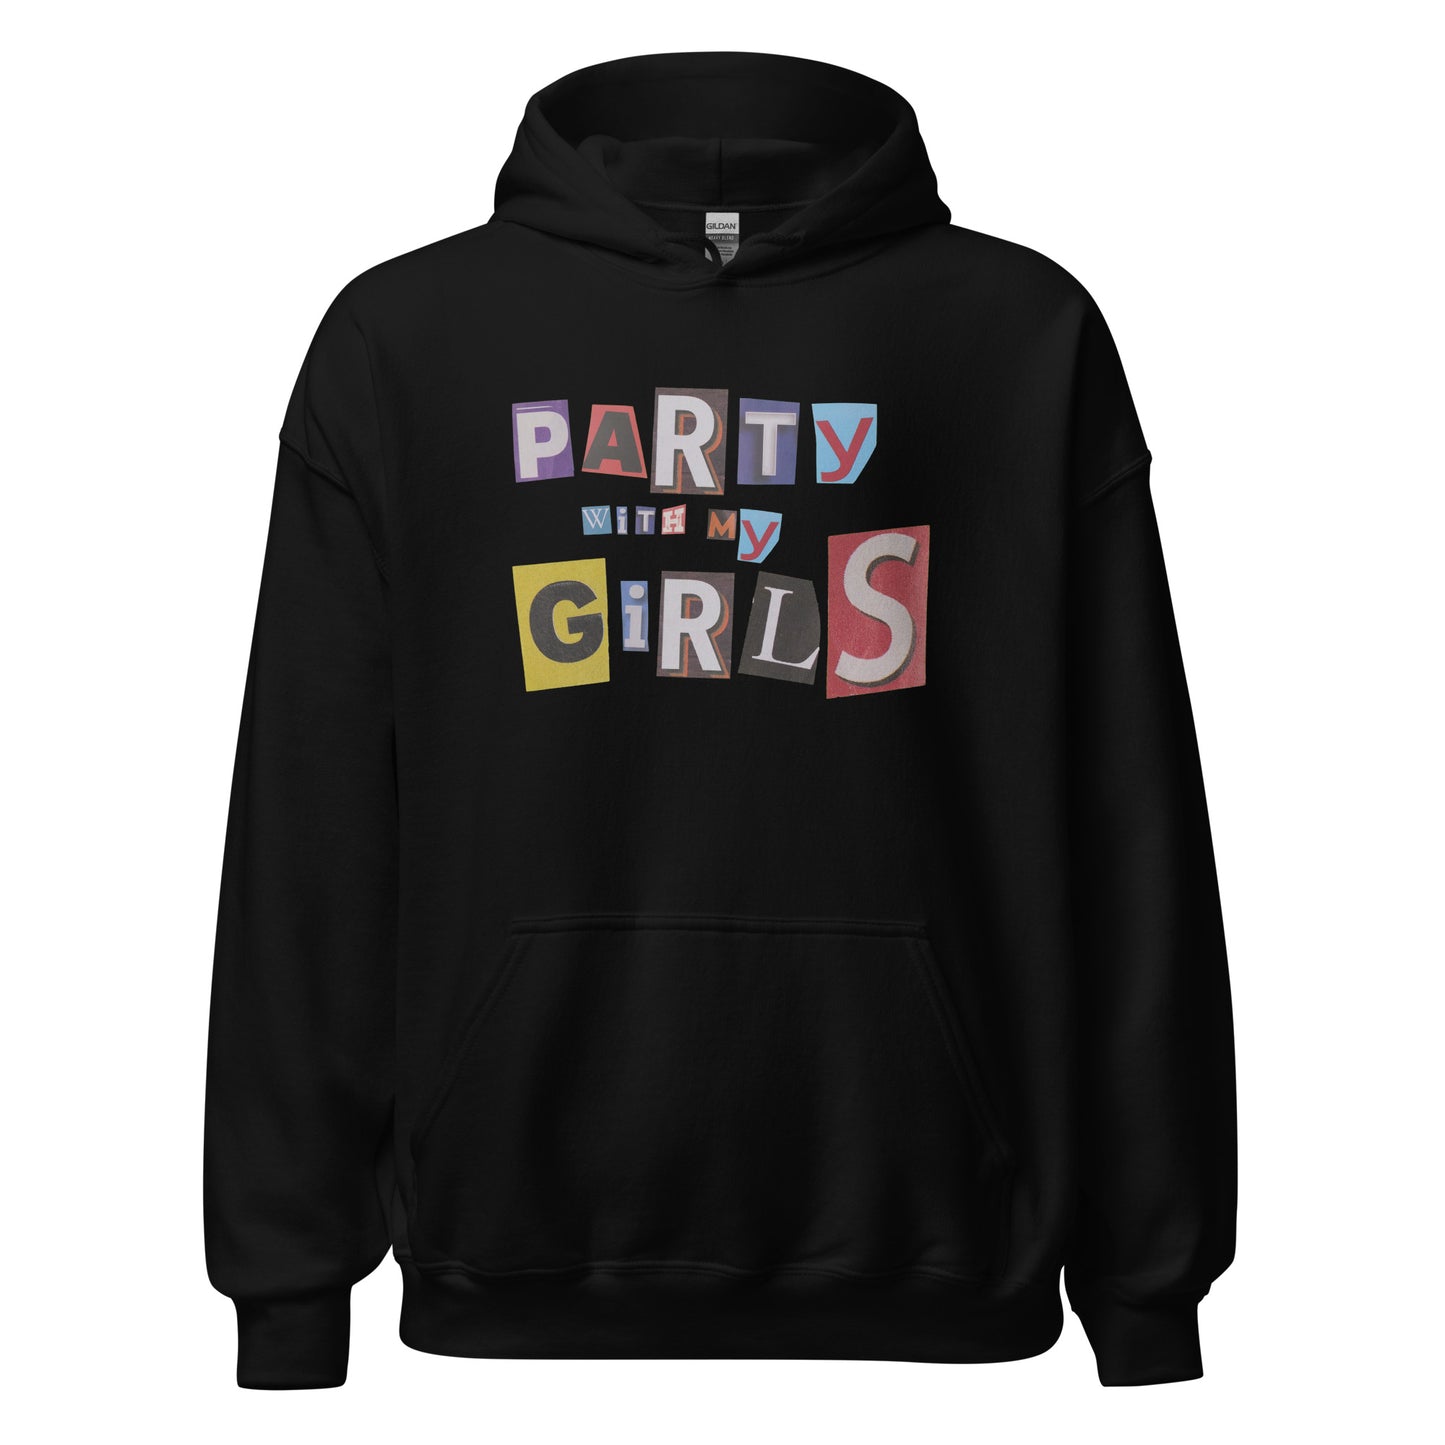 Party With My Girls Hoodie